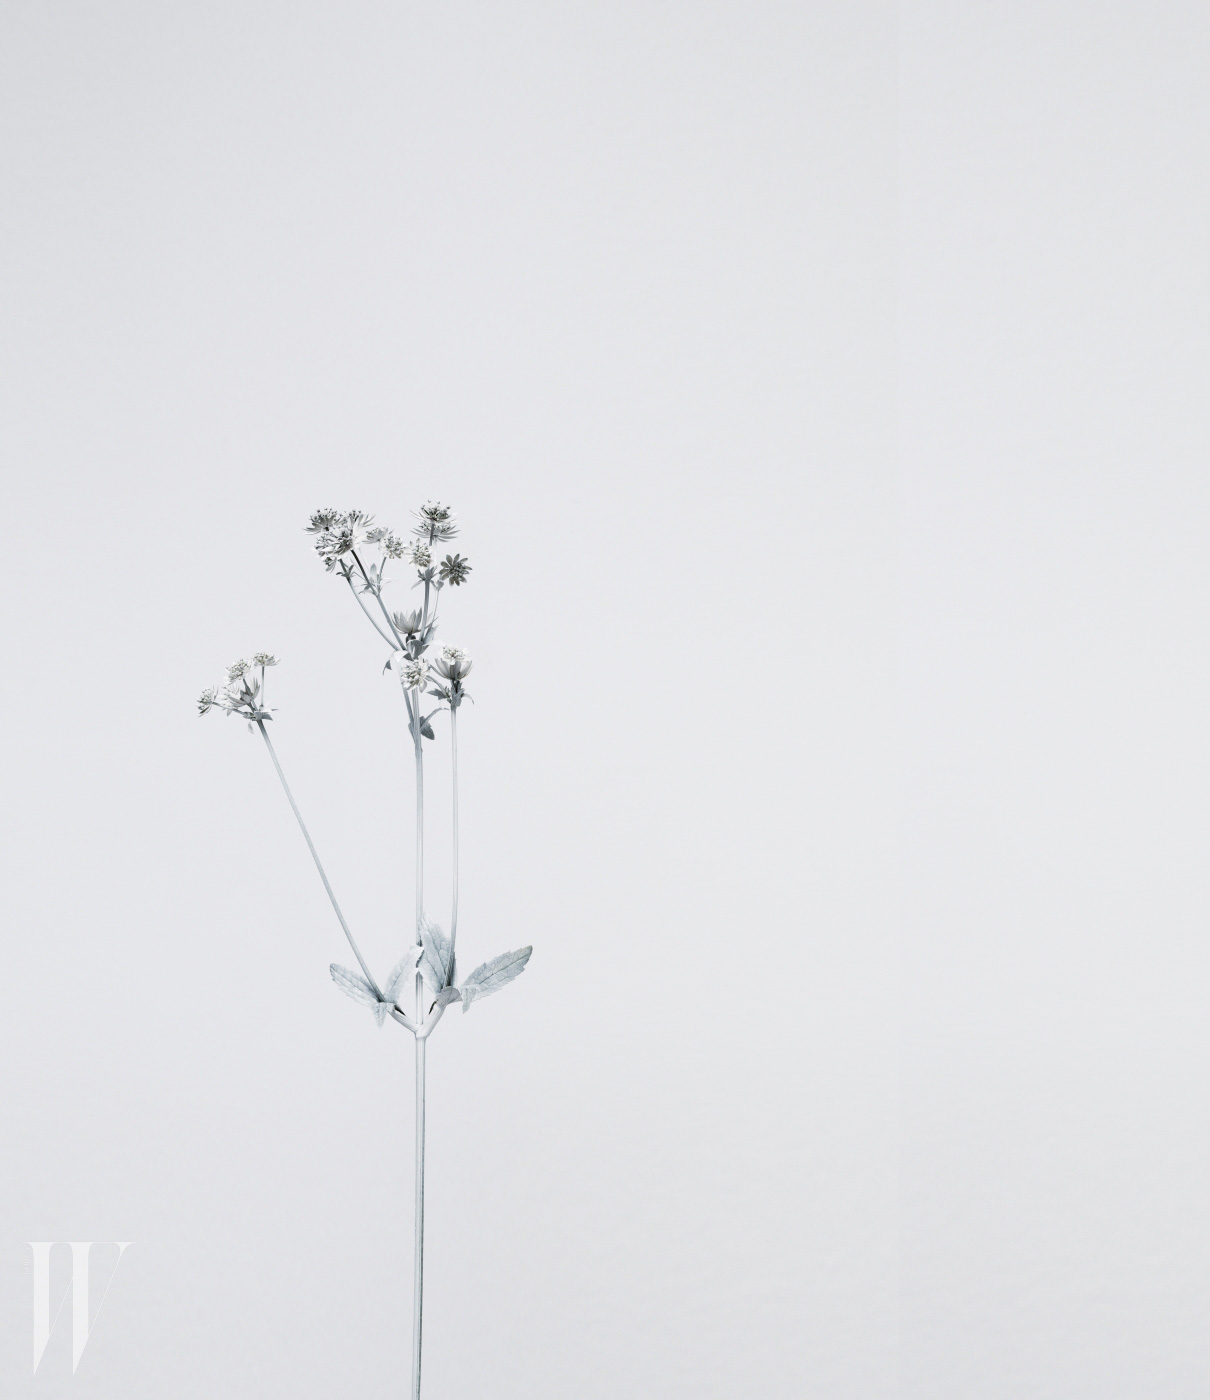 A plant, painted white, photographed against a white background